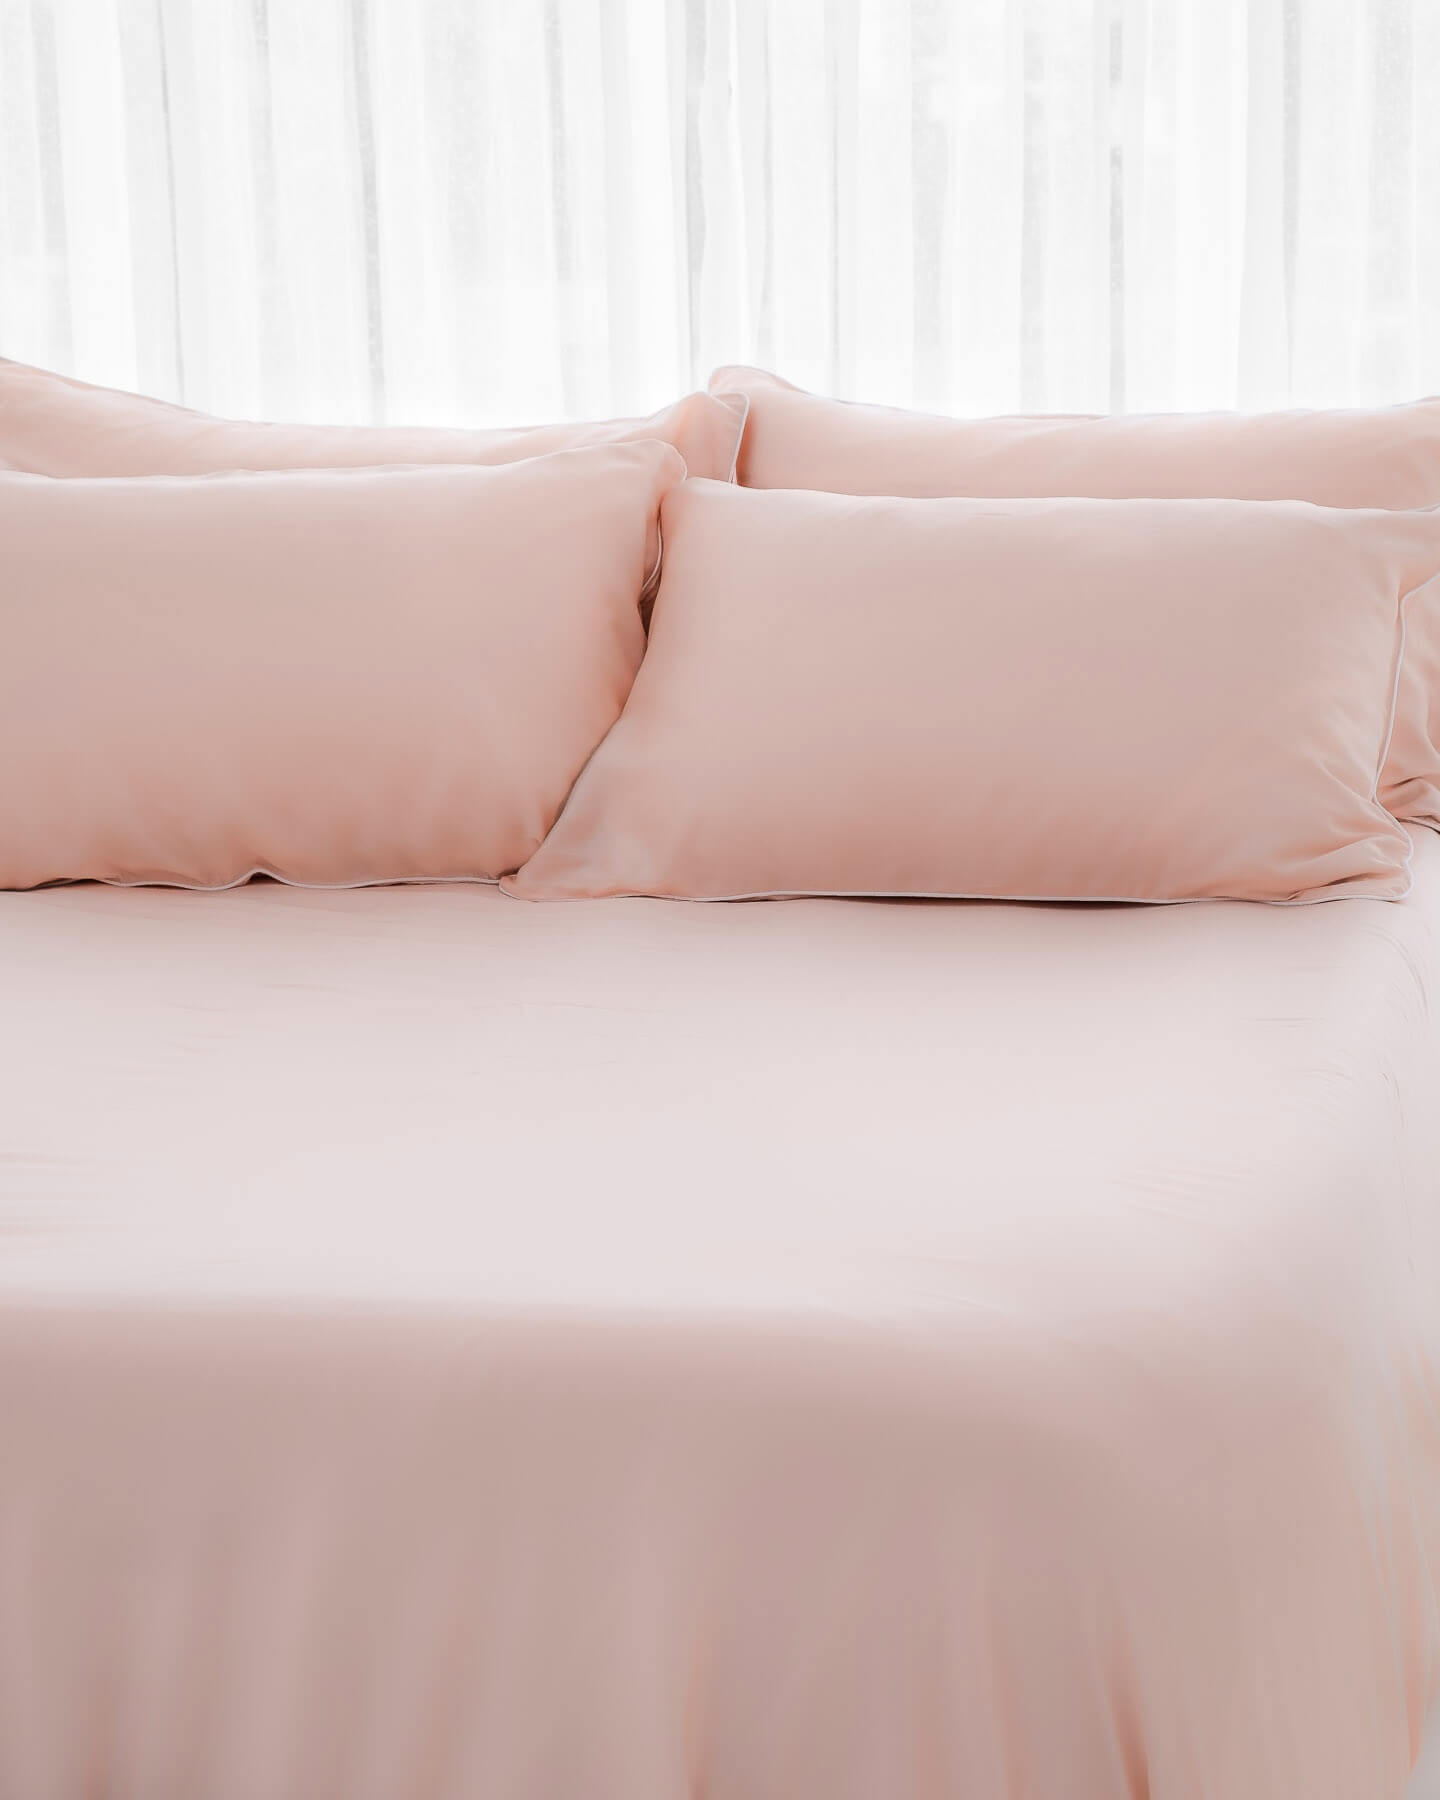 organic bamboo lyocell sheet set (2 pillowcases 1 fitted sheet) in daydream blush (pink with white piping). ava and ava ph soft, cooling, breathable bed sheets.